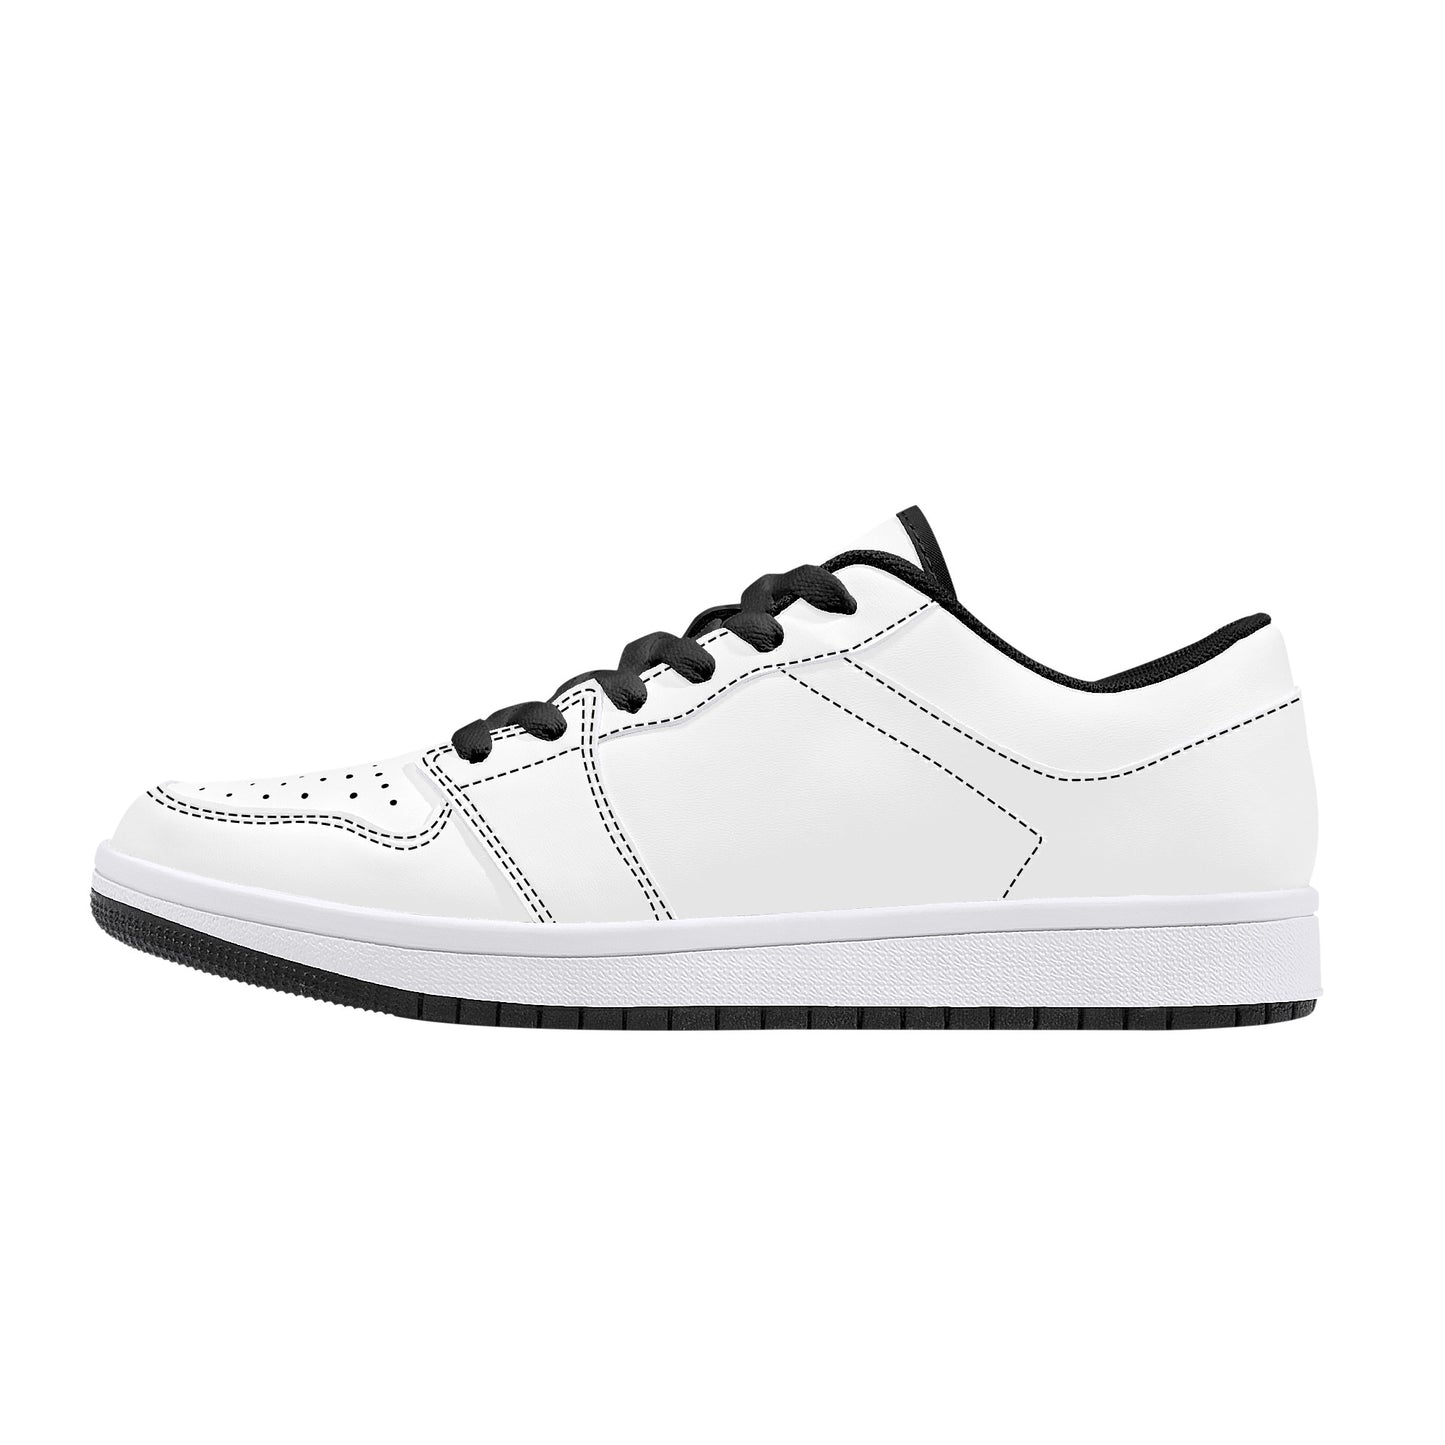 Low-Top Synthetic Leather Sneakers - White & Black